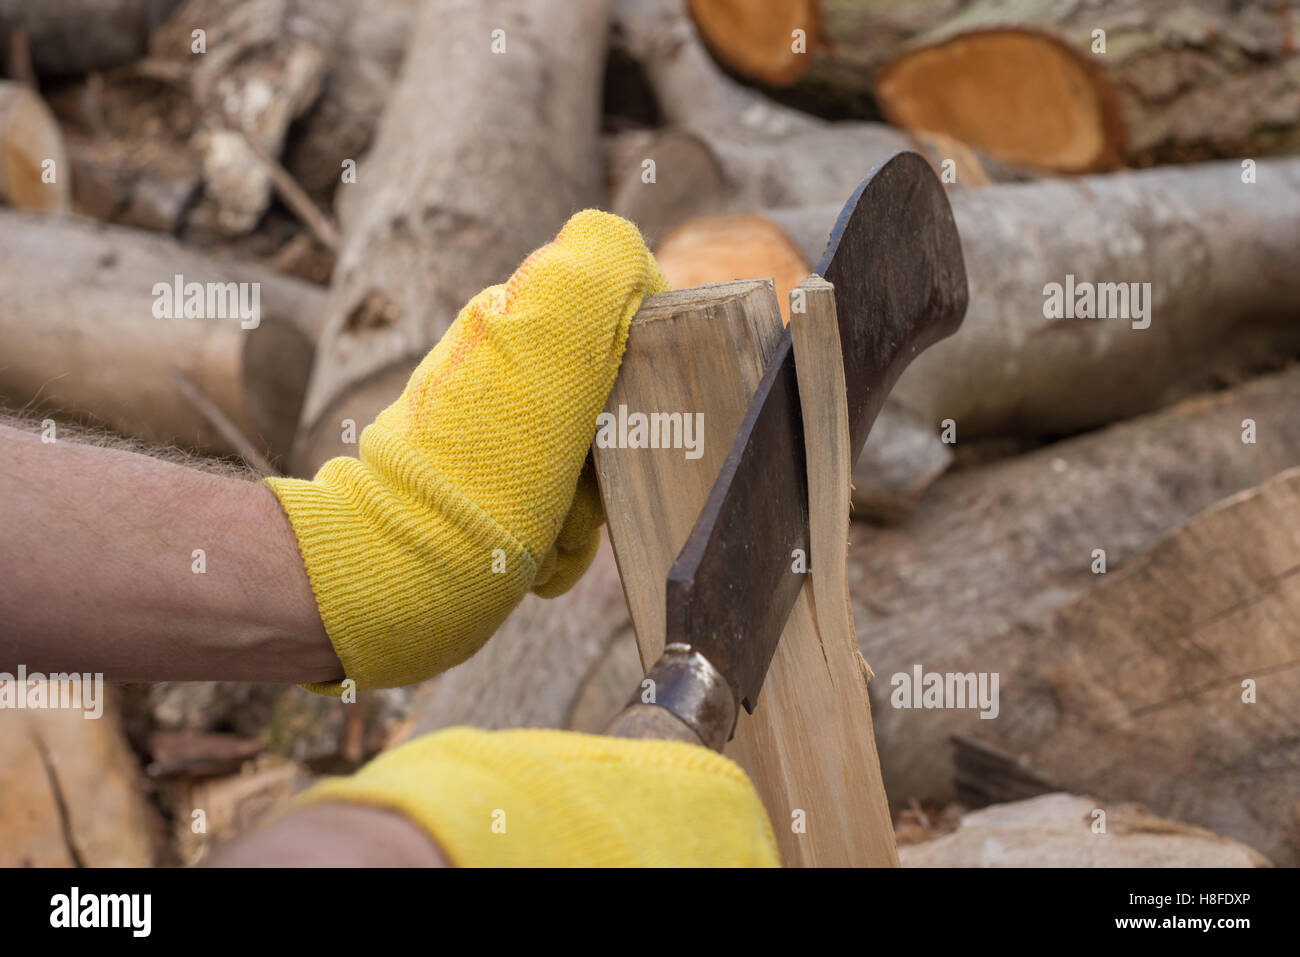 Gloved hands trimming firewood with a billhook machete Stock Photo